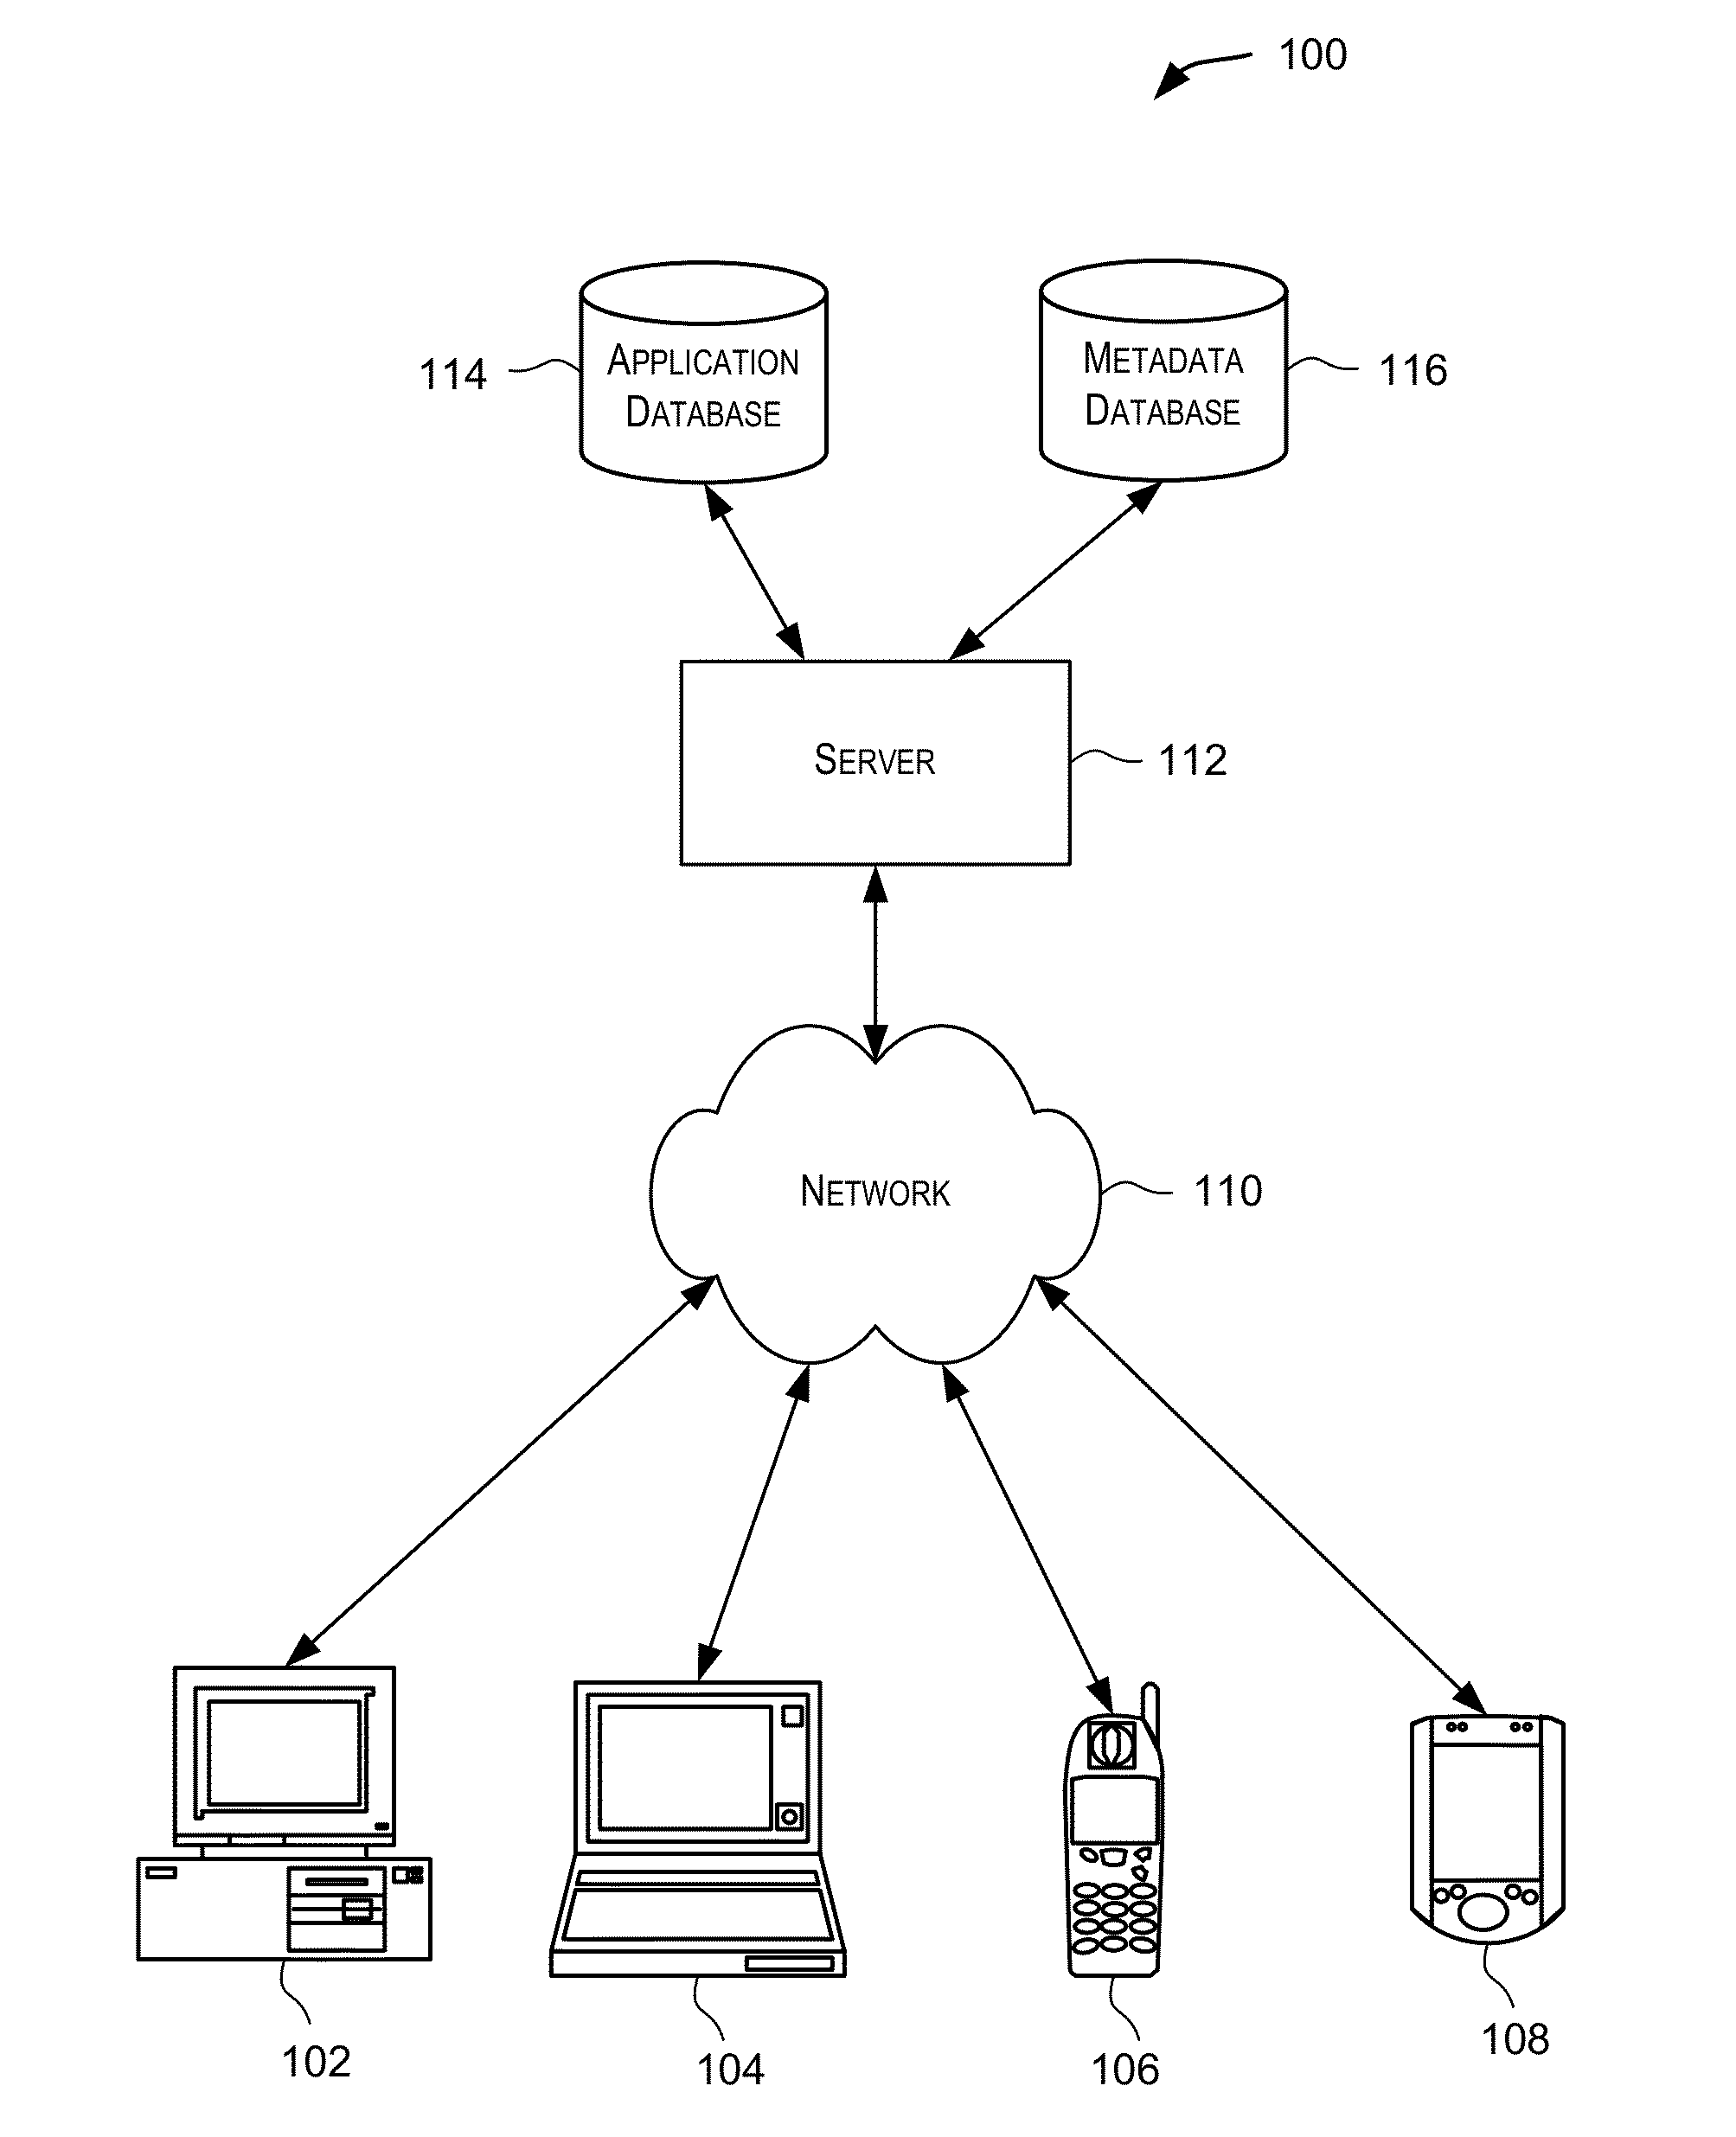 Fine-grained user authentication and activity tracking